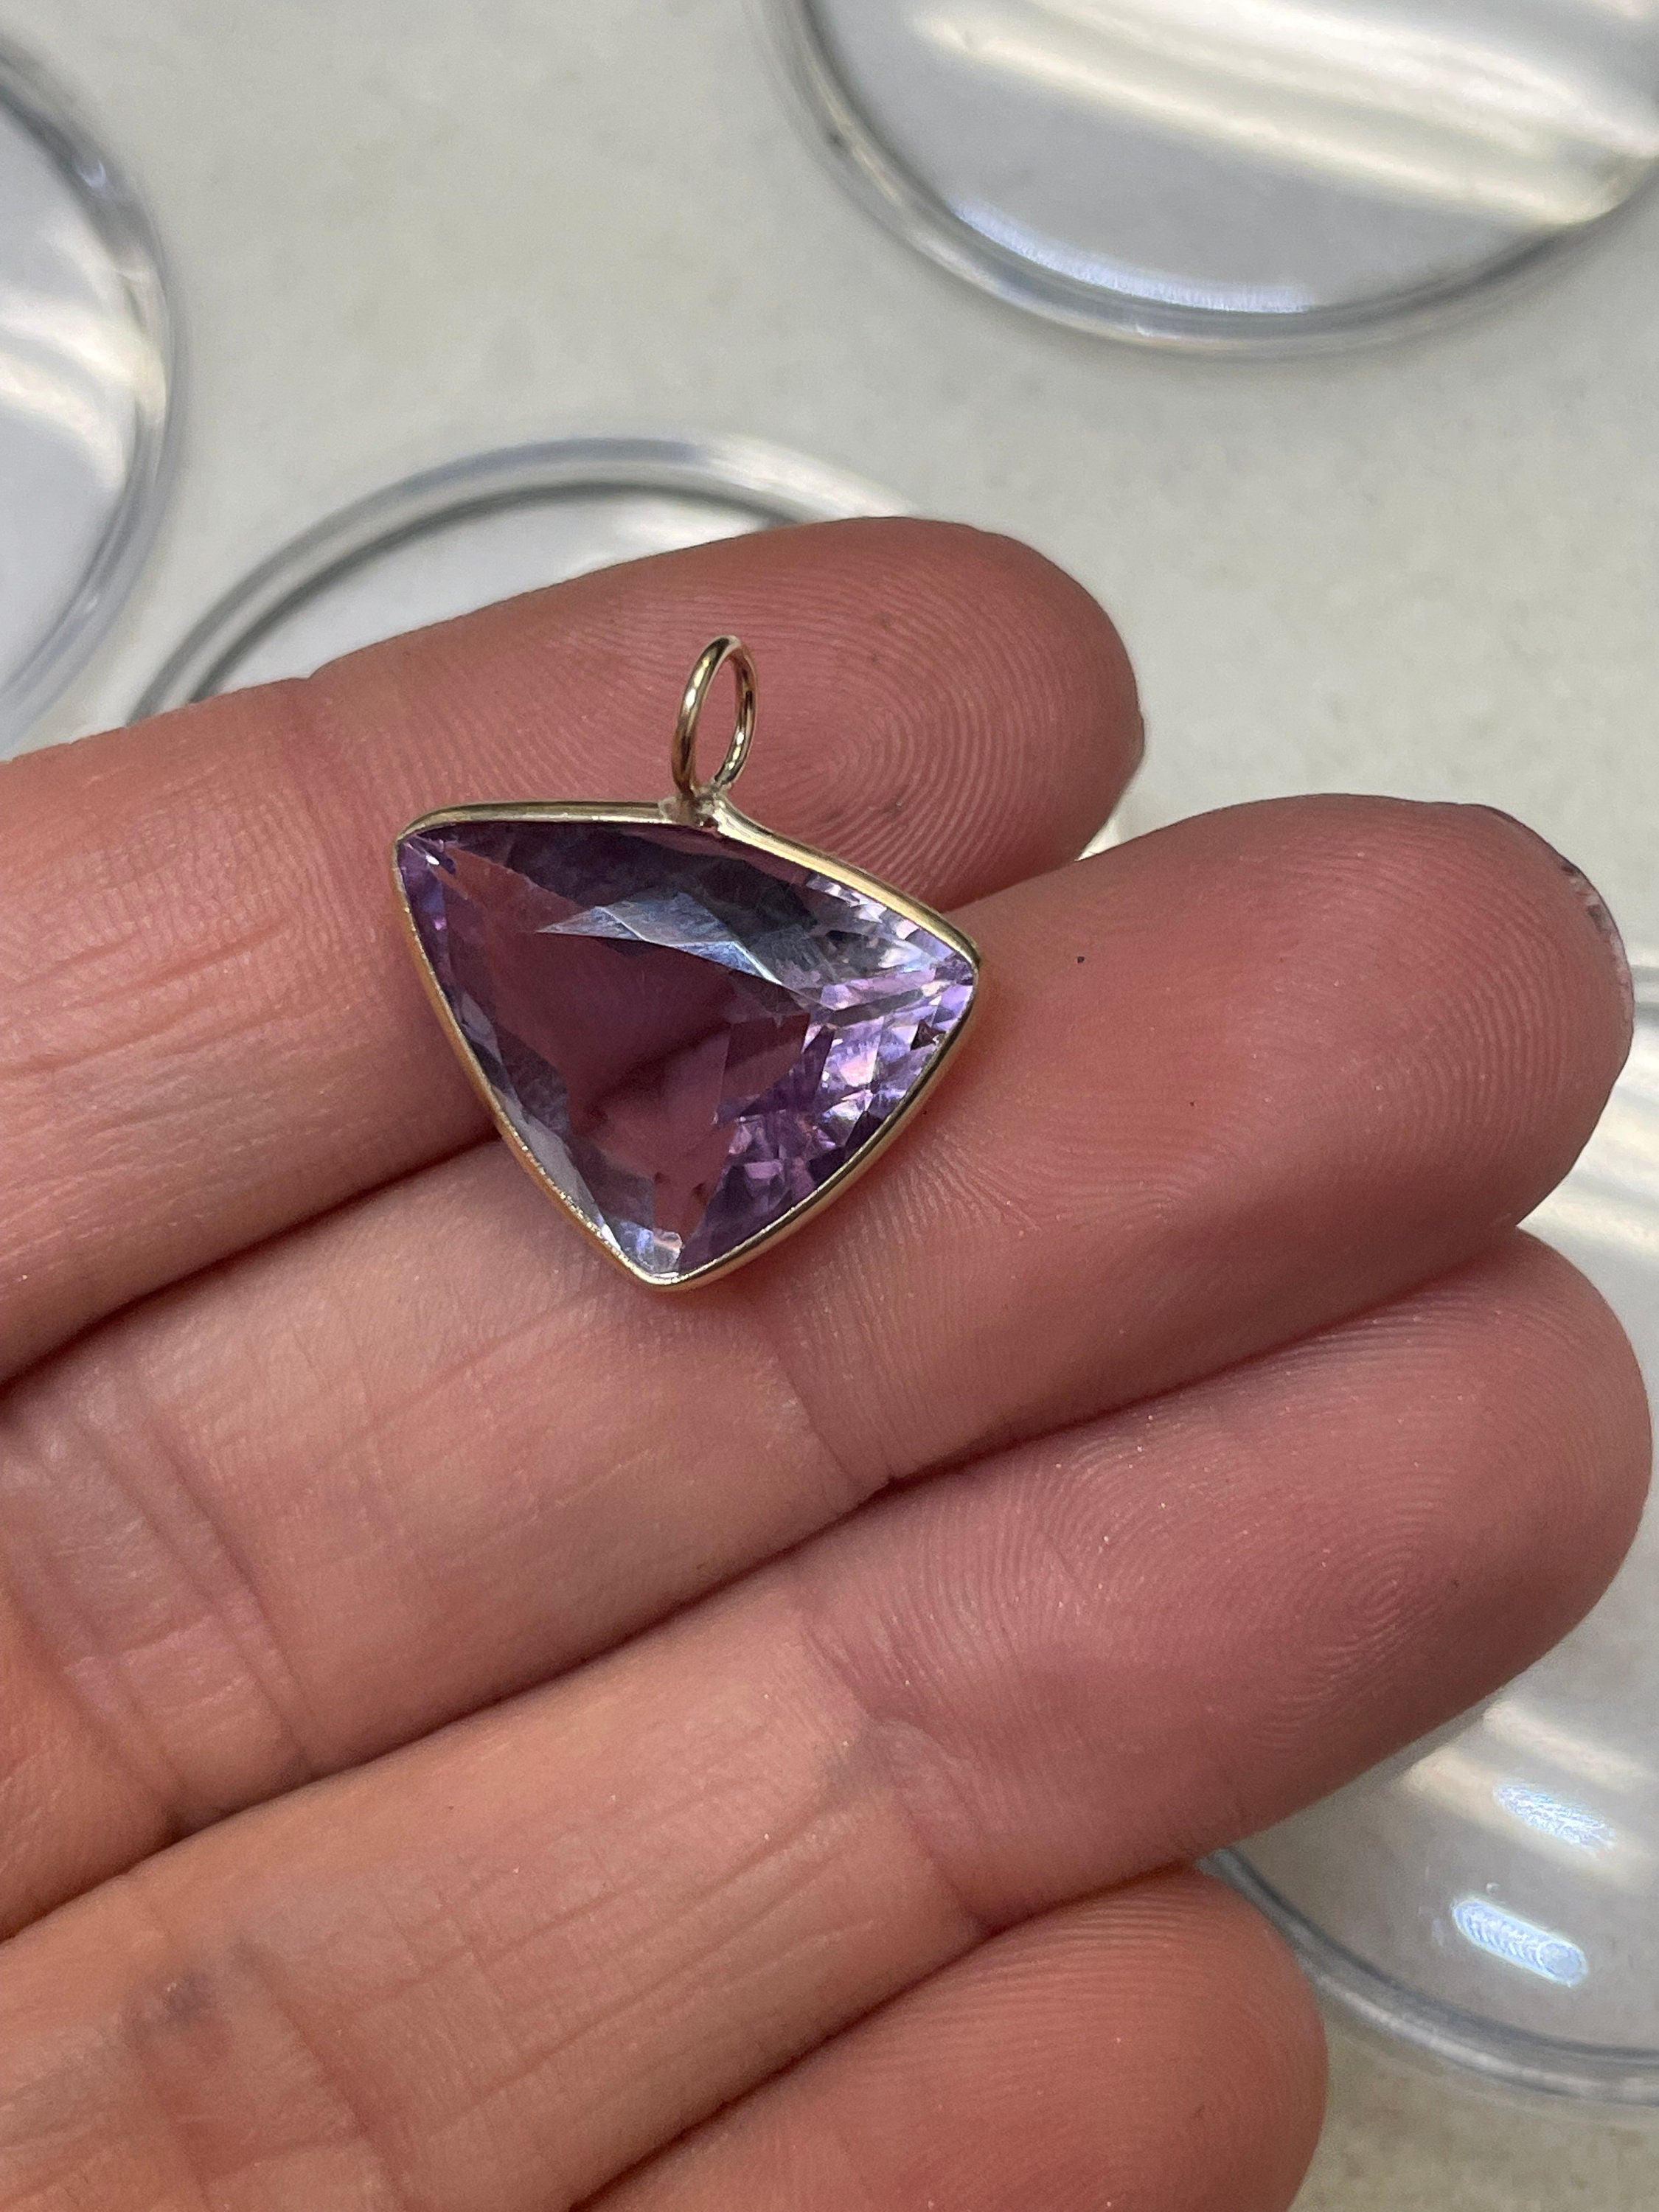 Unique 6CT Triangular Natural  Purple Amethyst Gem Charm in Solid 14K Yellow Gold 18x16mm